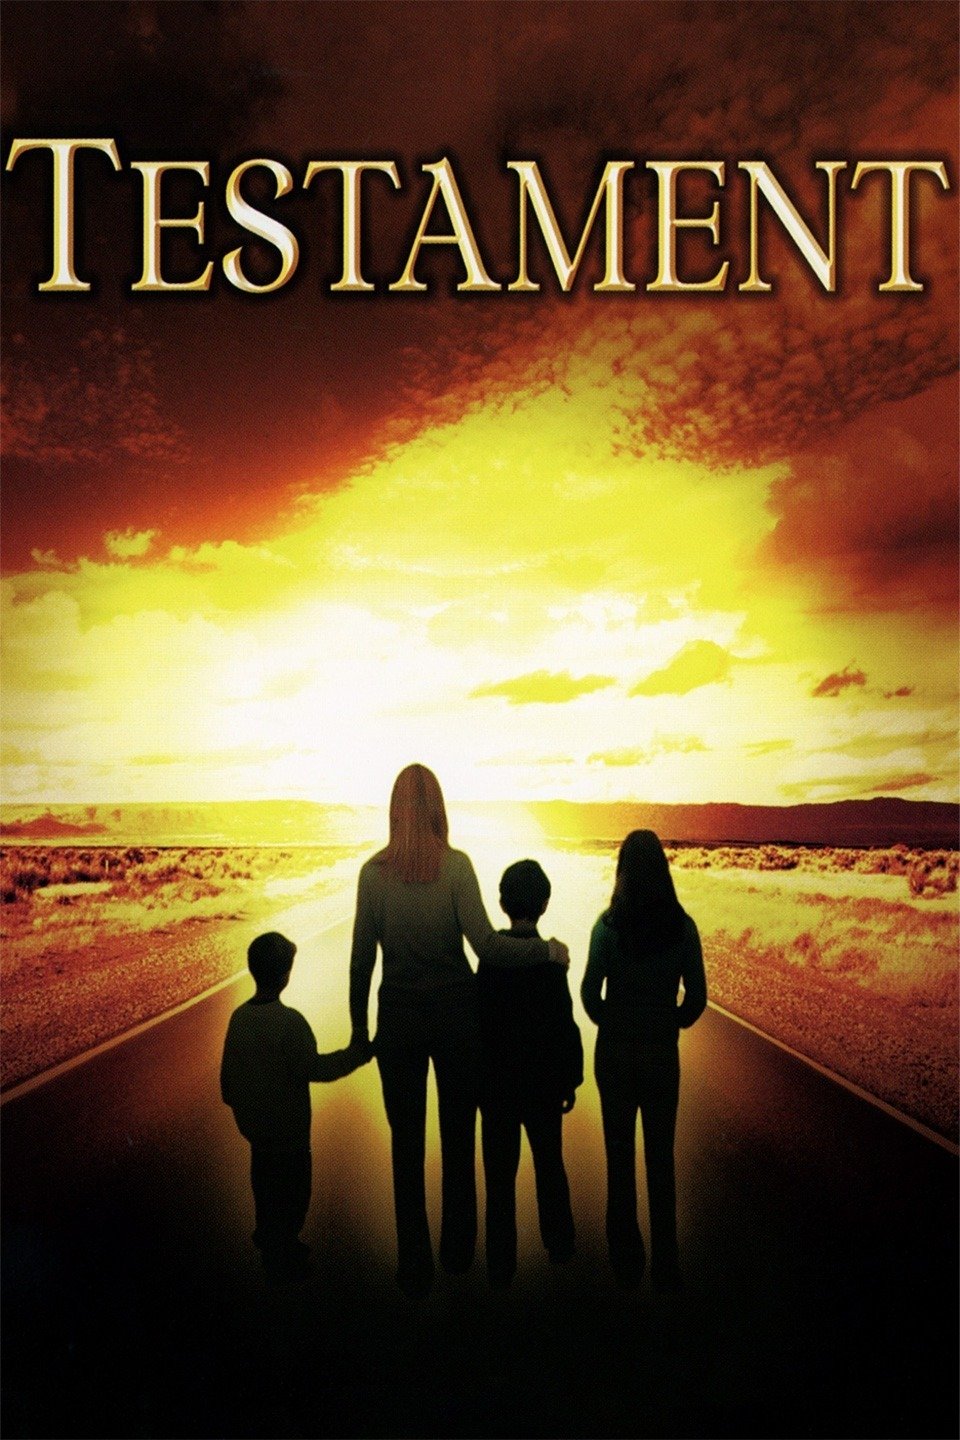 the testaments movie rating